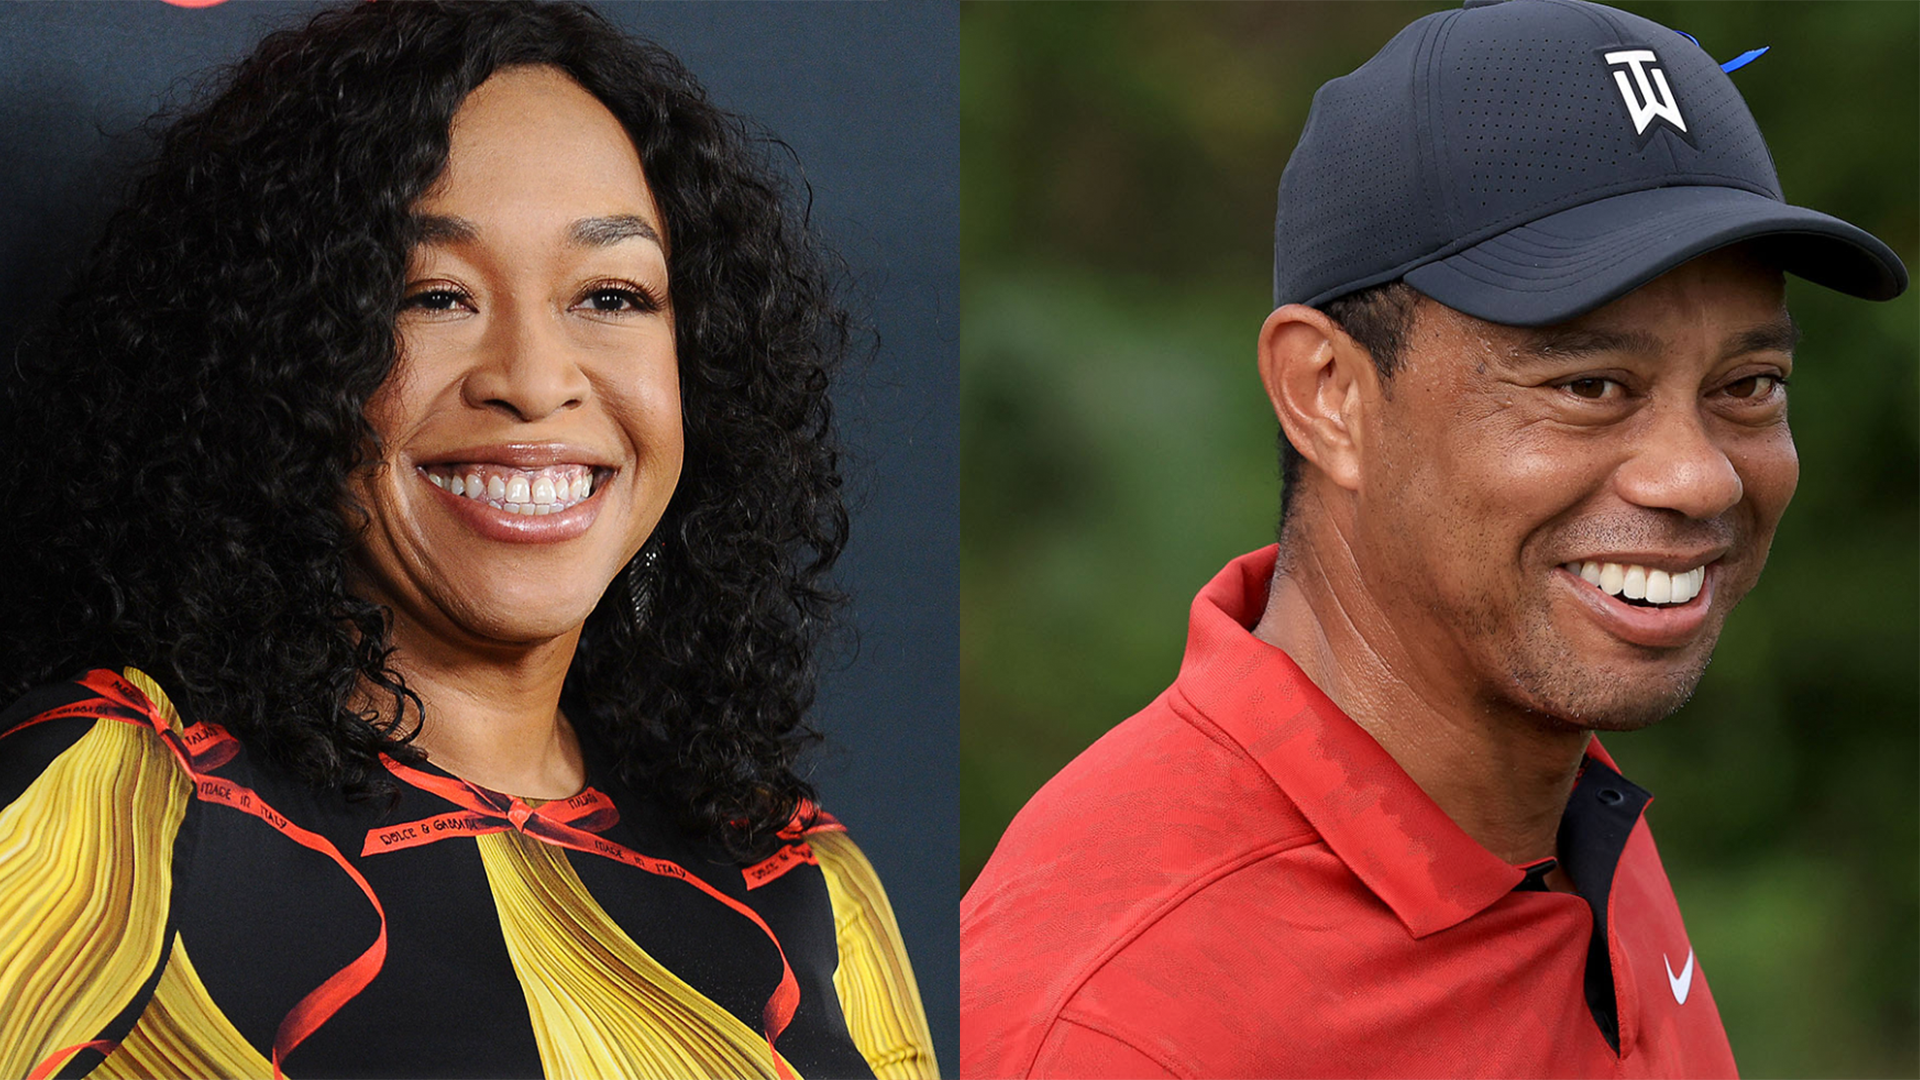 Shonda Rhimes Becomes An Owner Of The Los Angeles Golf Club, The Inaugural Team In Tiger Woods' Tech-Infused Golf League